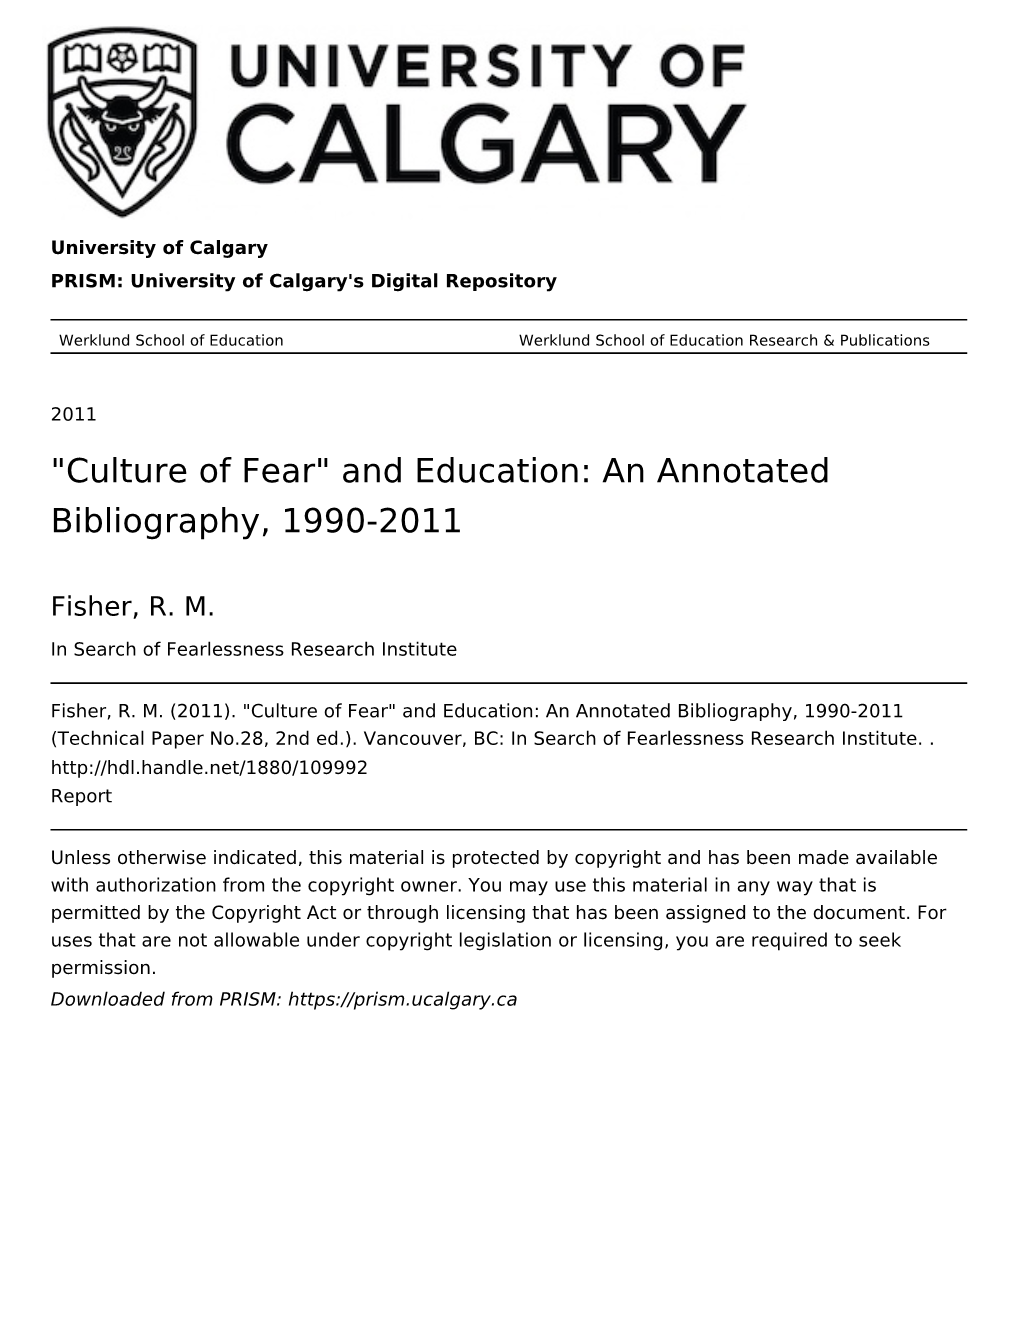 Culture of Fear" and Education: an Annotated Bibliography, 1990-2011